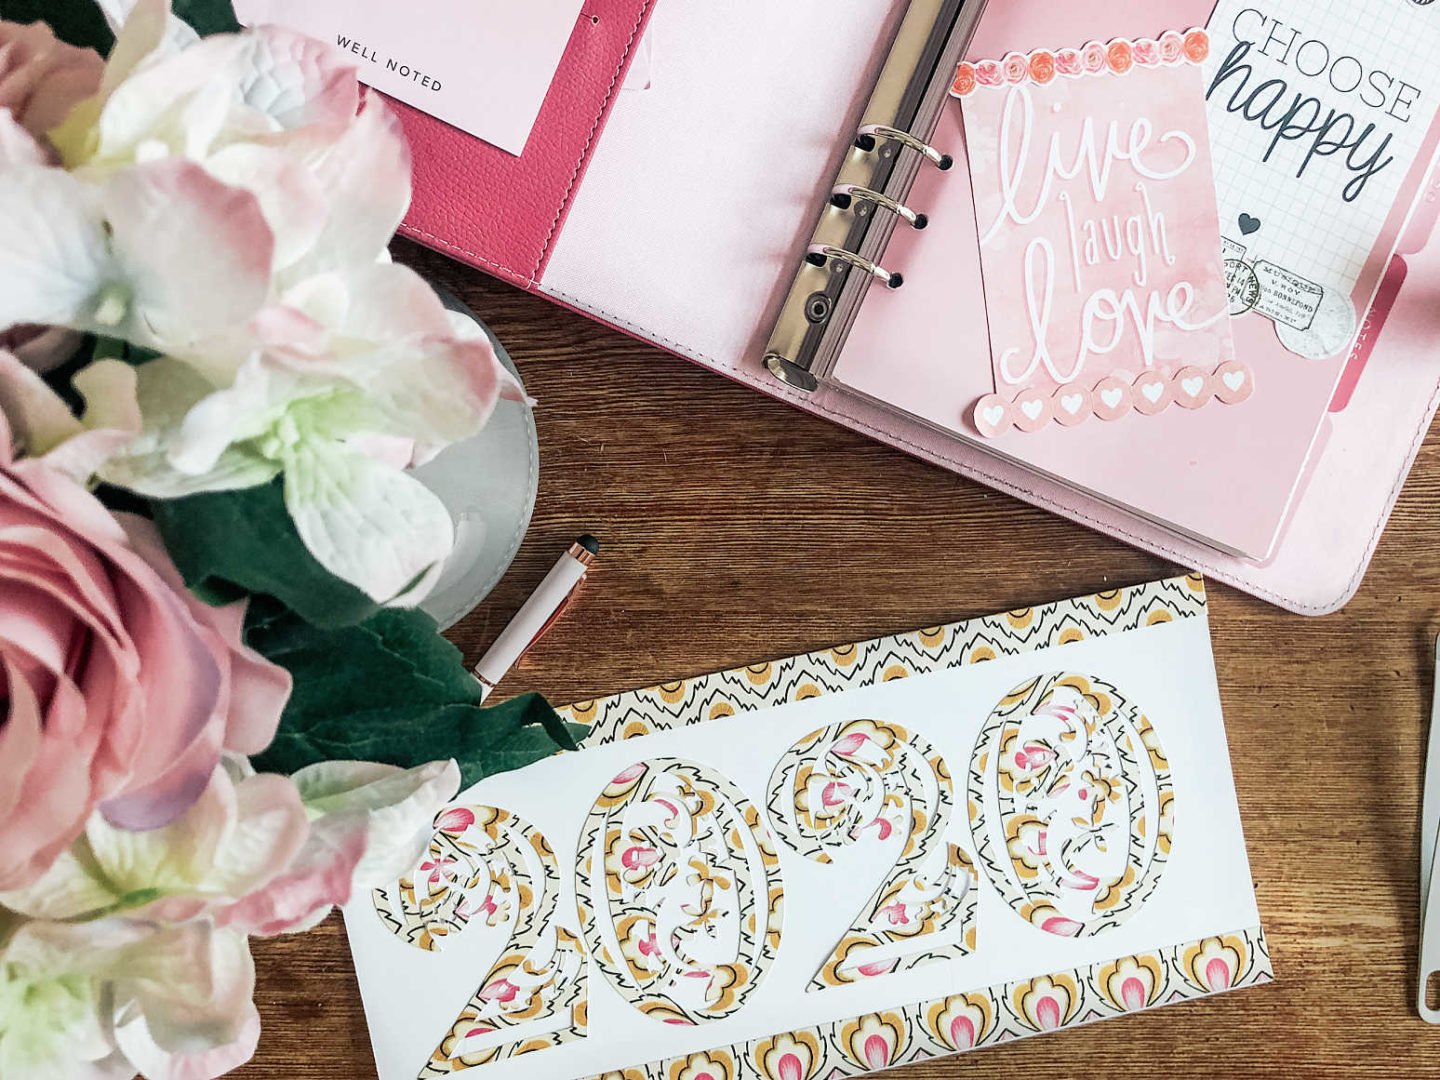 Free Cricut Floral Alphabet Templates For Paper cuts, Vinyl decals and stickers 